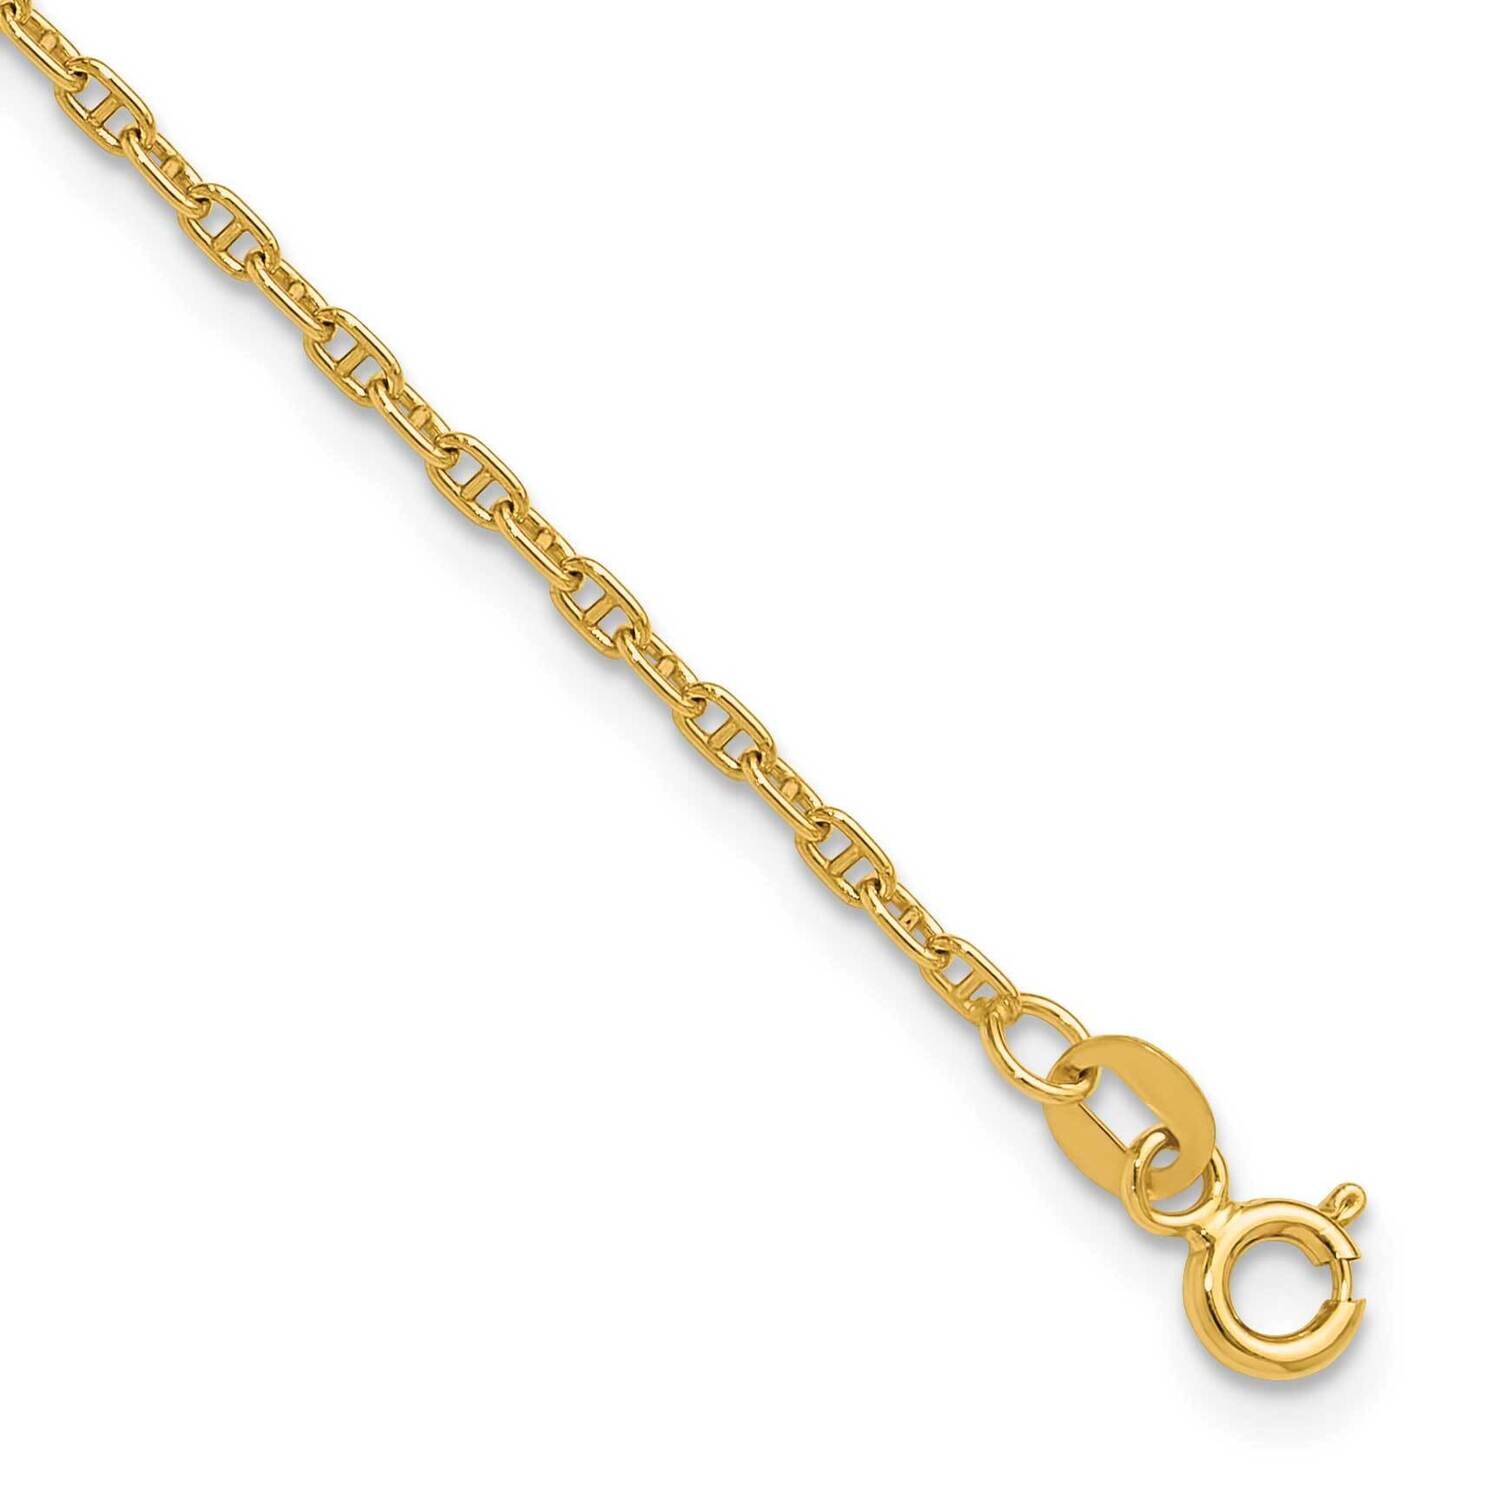 1.8mm Mariners Link Chain 10 Inch 14k Gold MA050-10